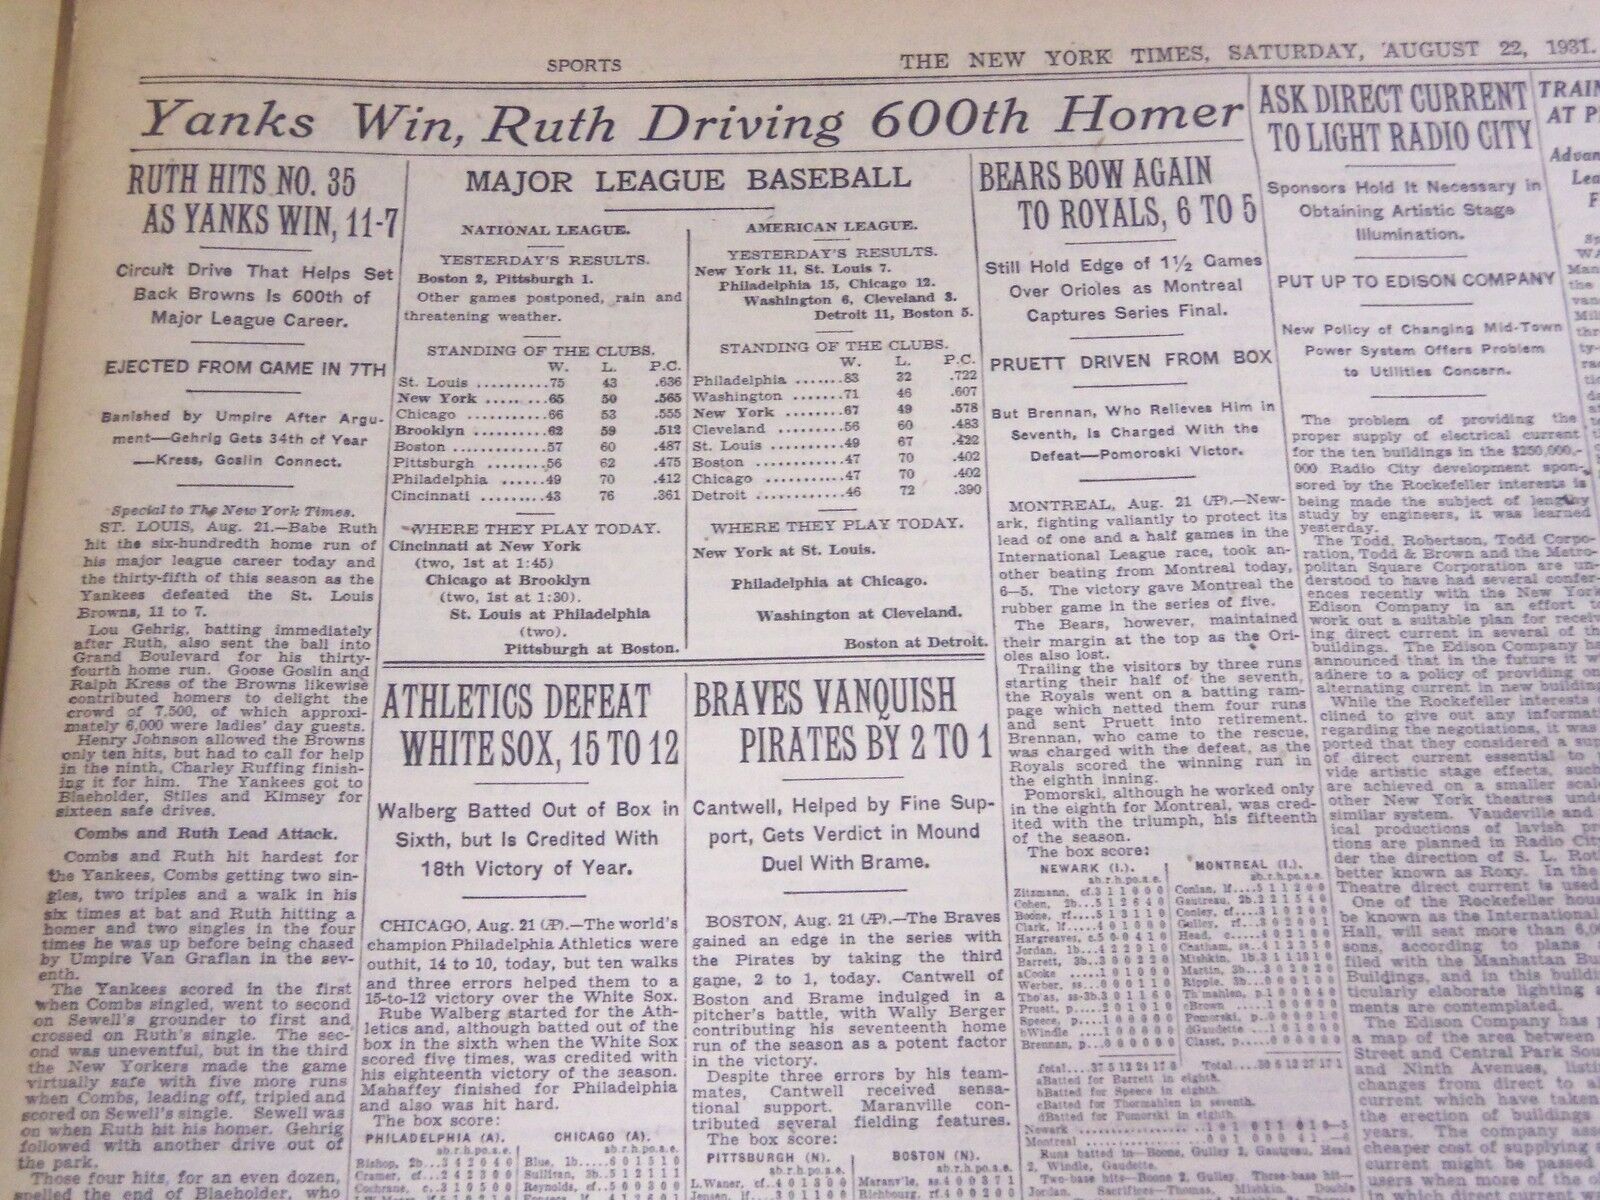 1931 AUGUST 22 NEW YORK TIMES - BABE RUTH HITS 600TH HOMER - NT 4991